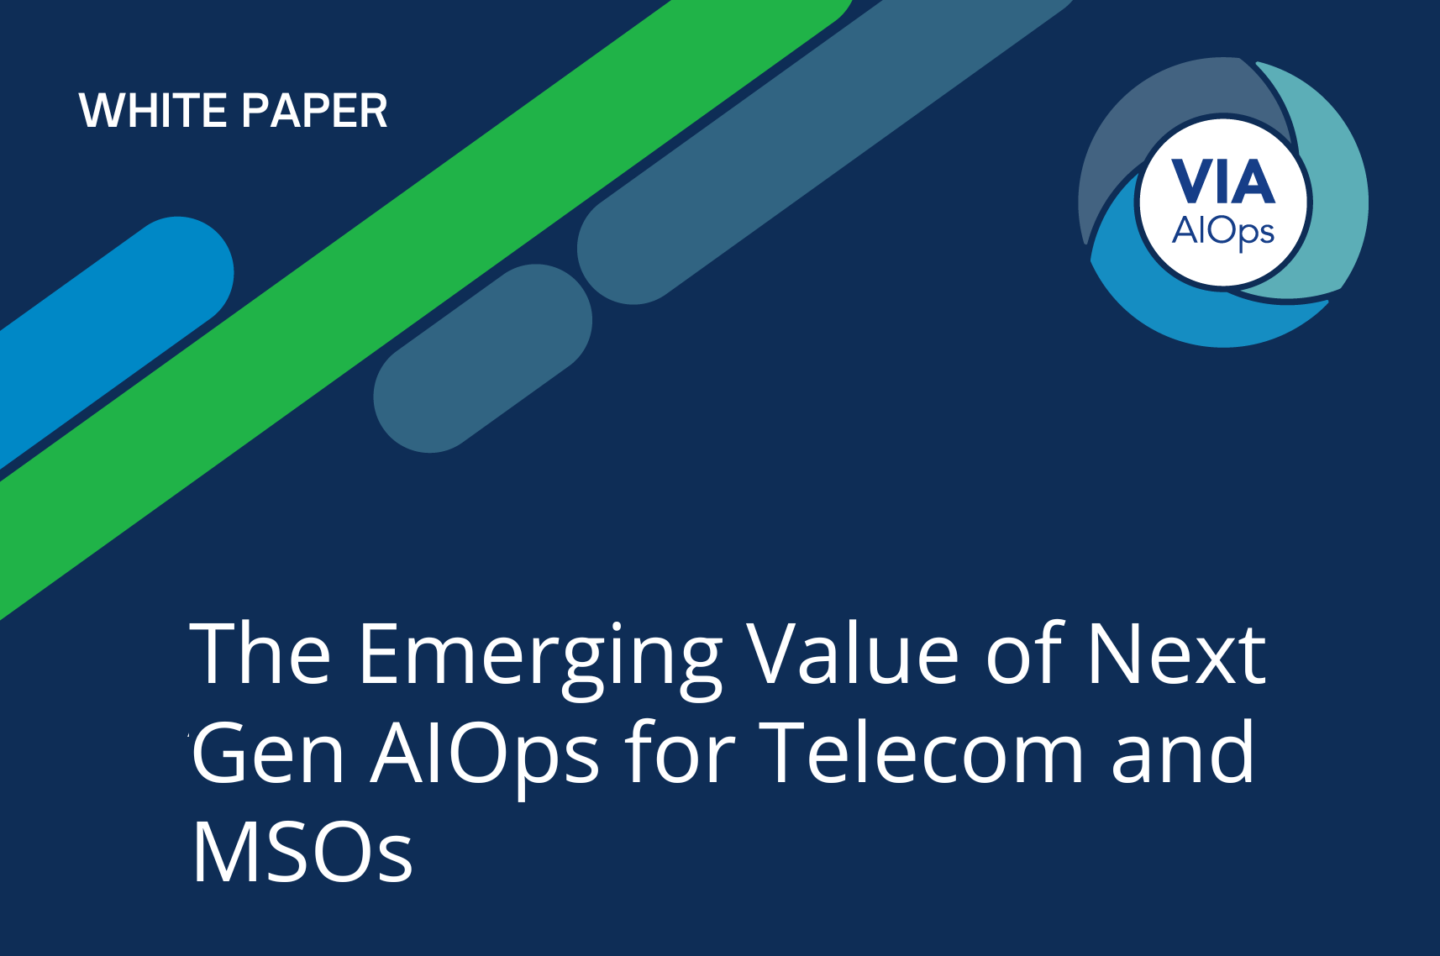 Banner for The Emerging Value of Next Gen AIOps for Telecom and MSOs